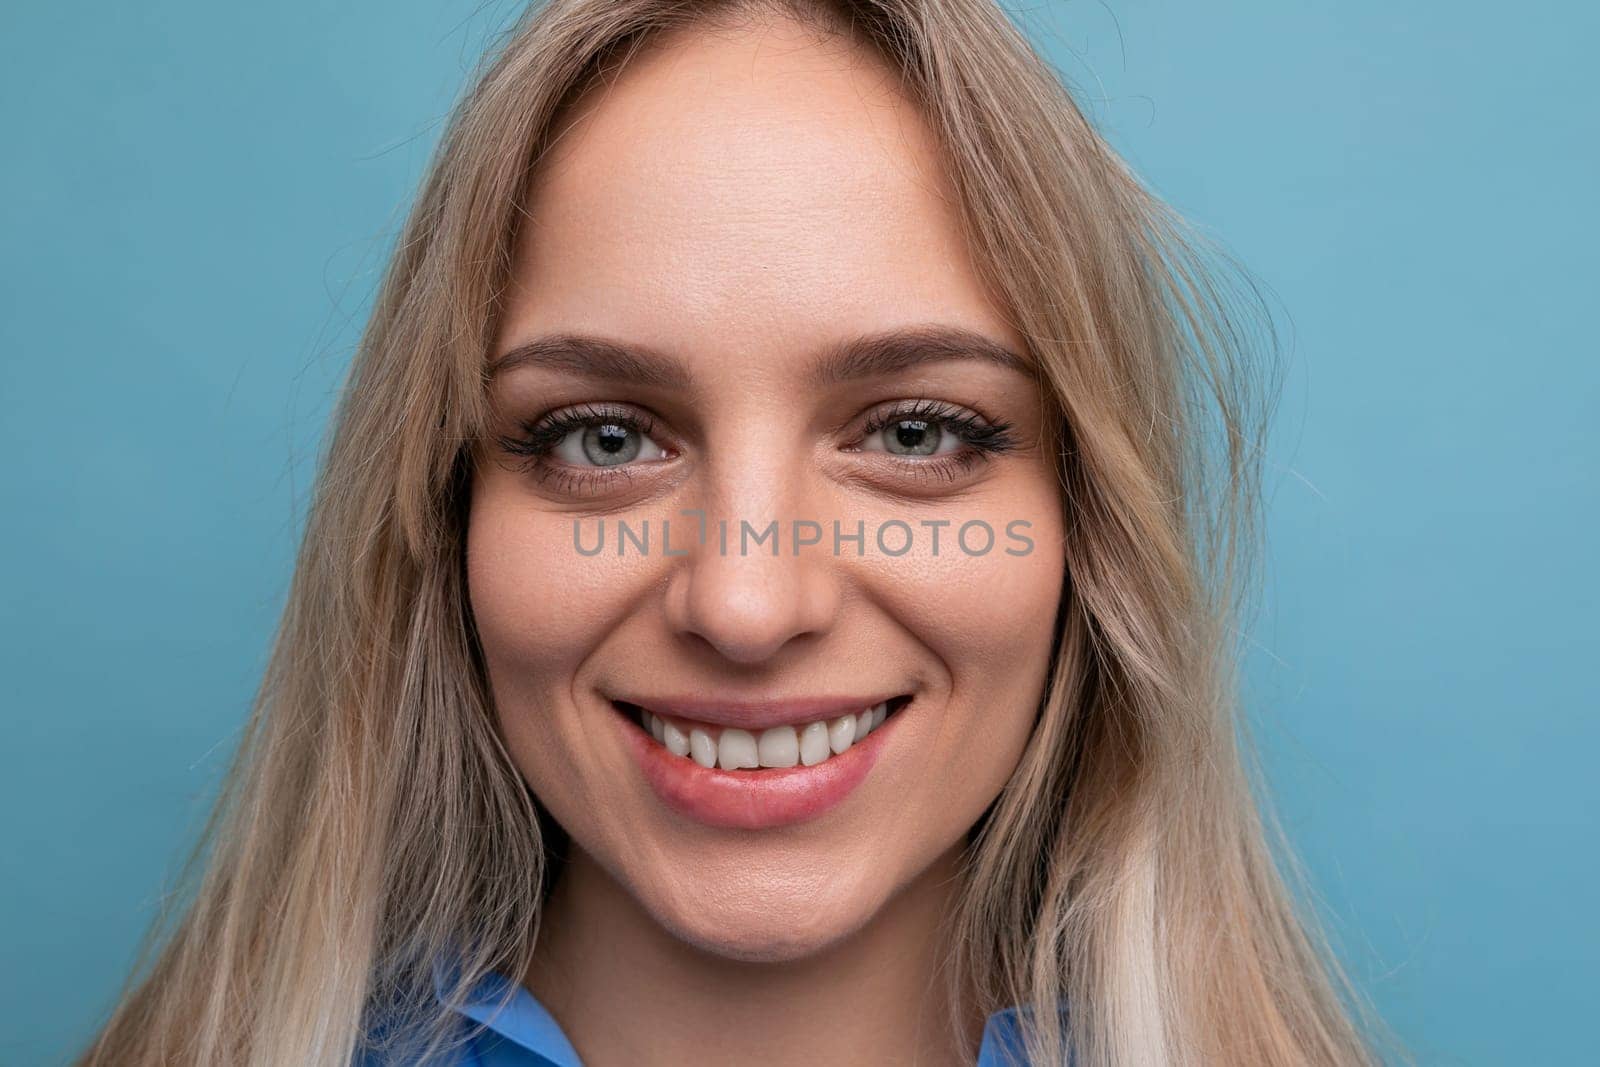 beautiful young woman in a blue shirt smiling cheerfully on a blue background.